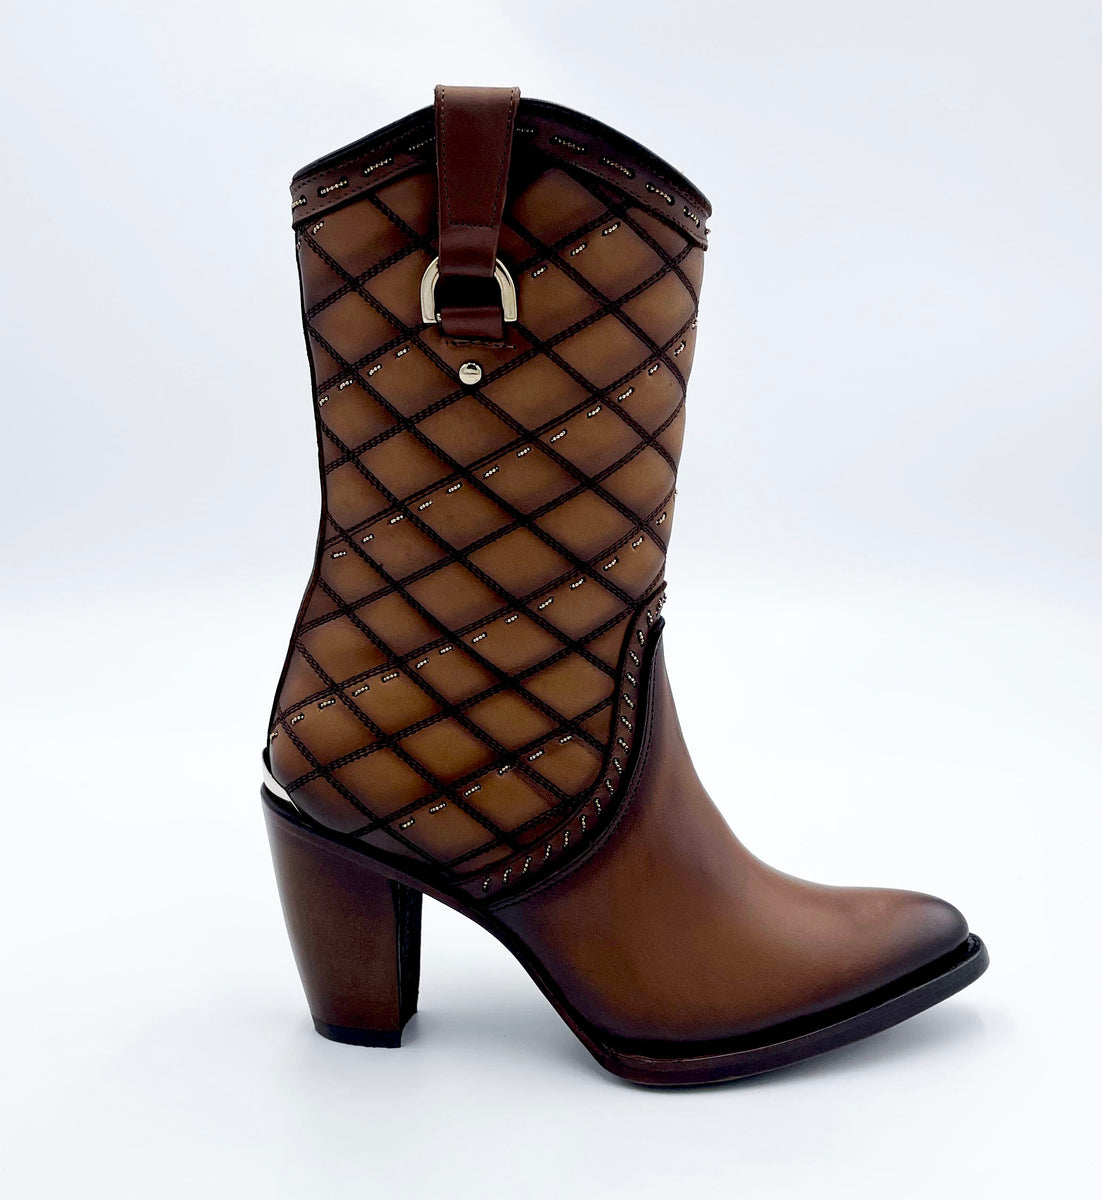 Cuadra Women's Brown Embroidery & Woven Round Toe Boots - Toled – Guadalajara